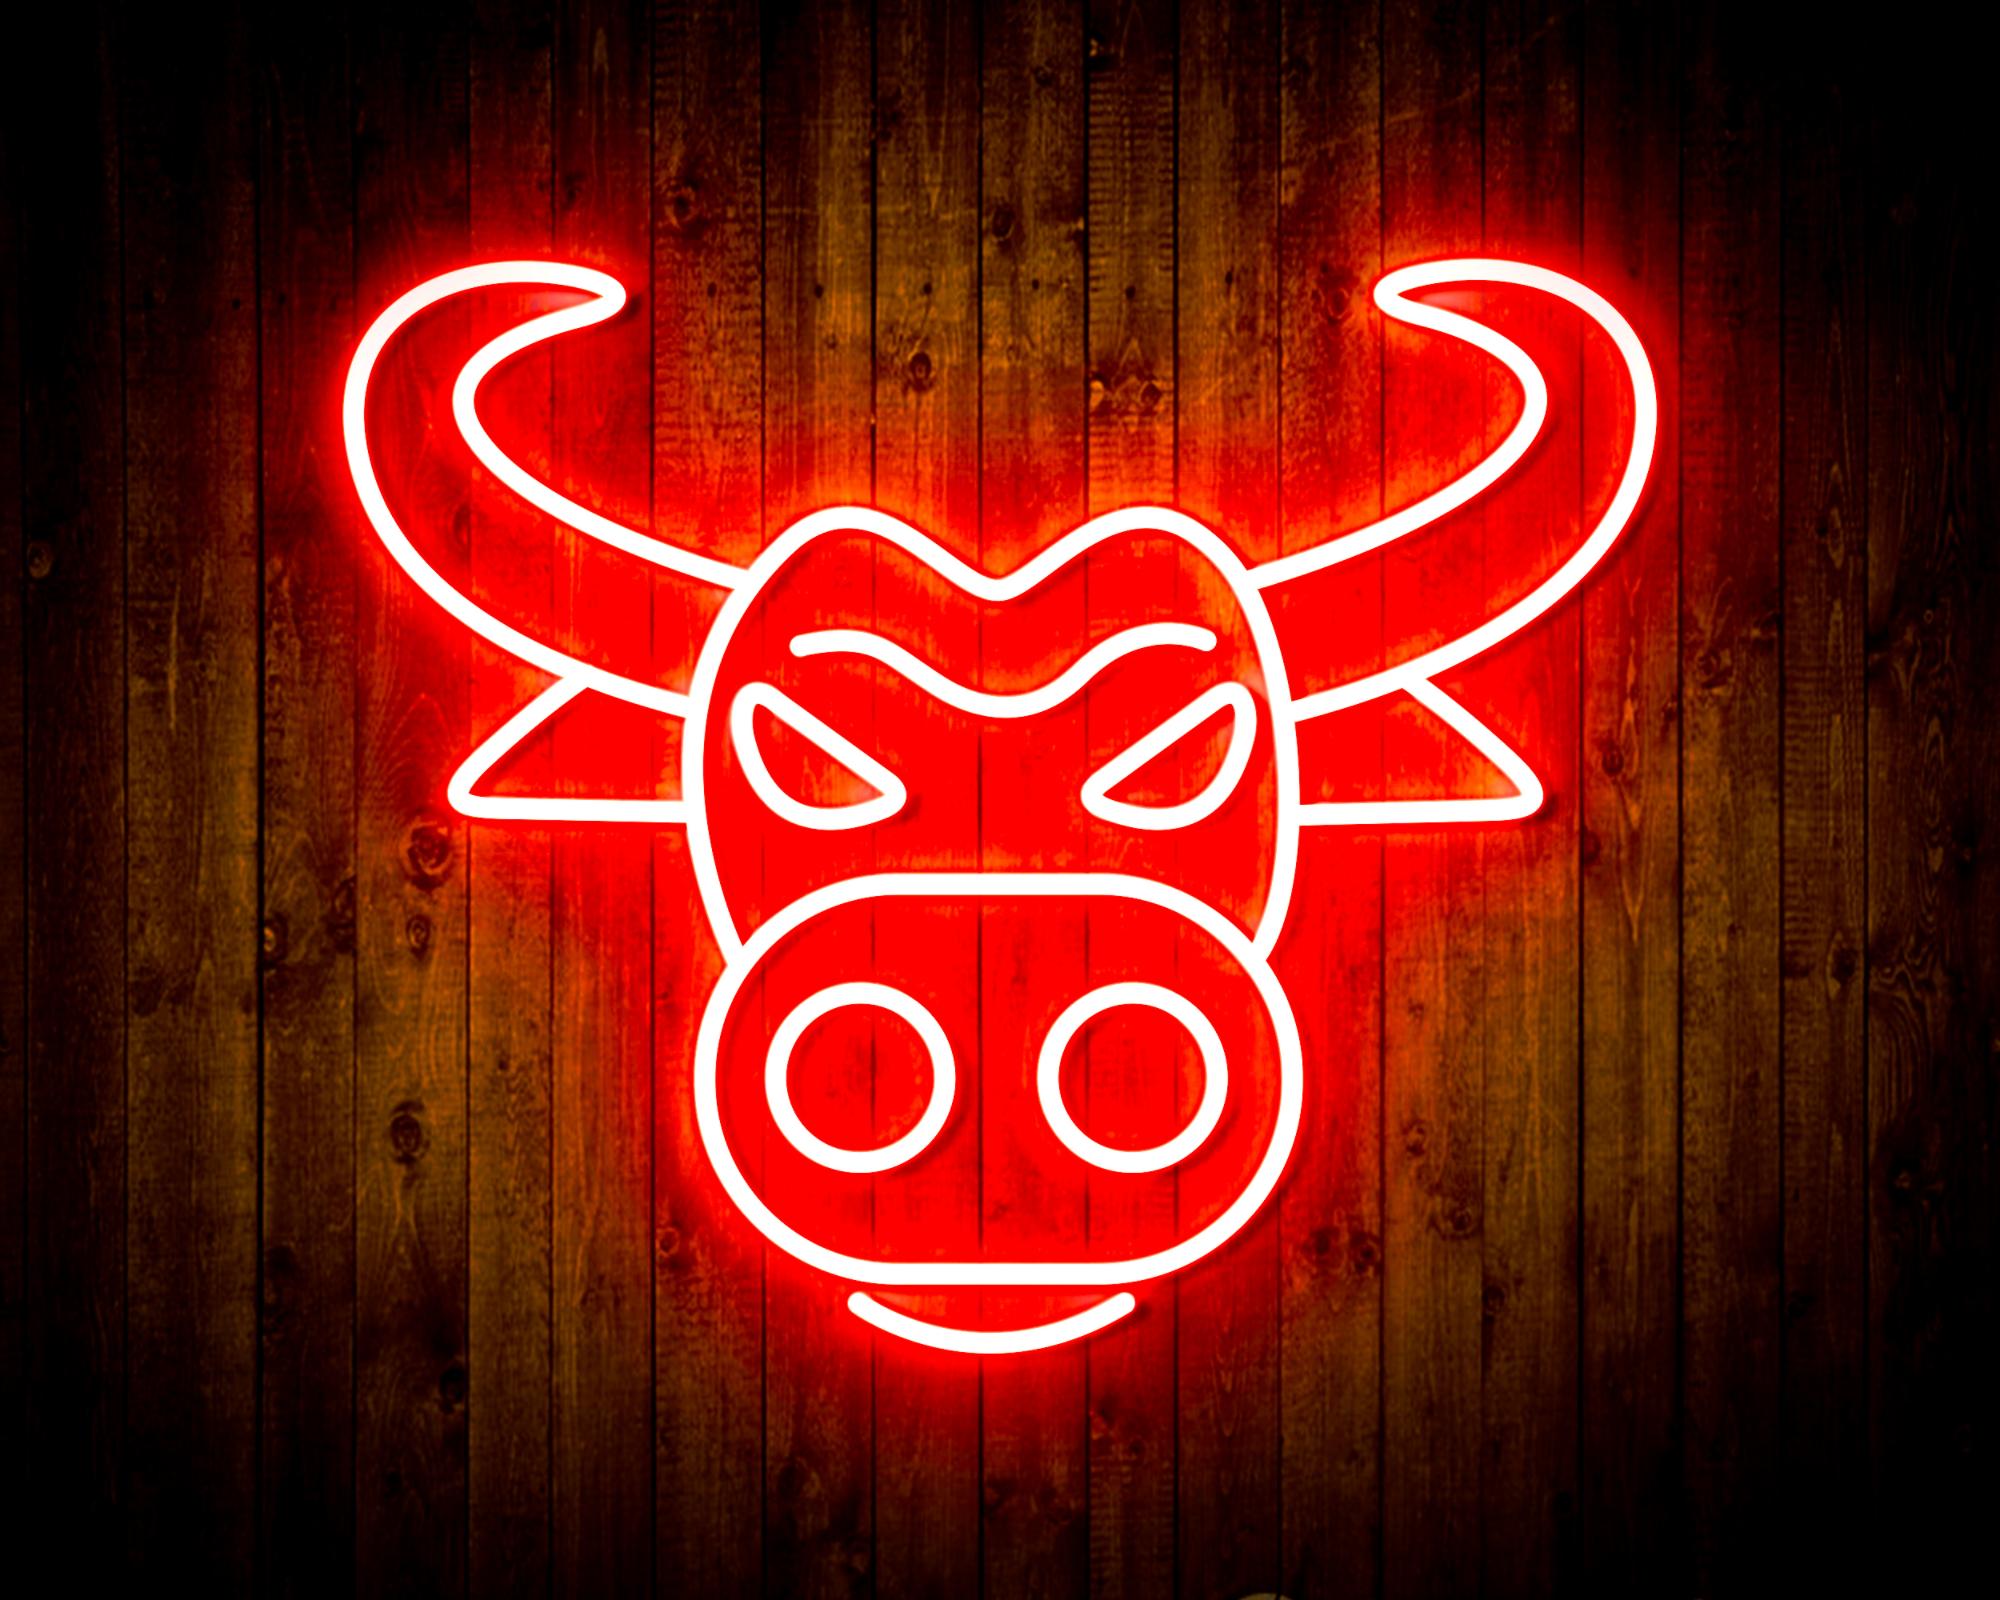 OX Year LED Neon Sign Wall Light